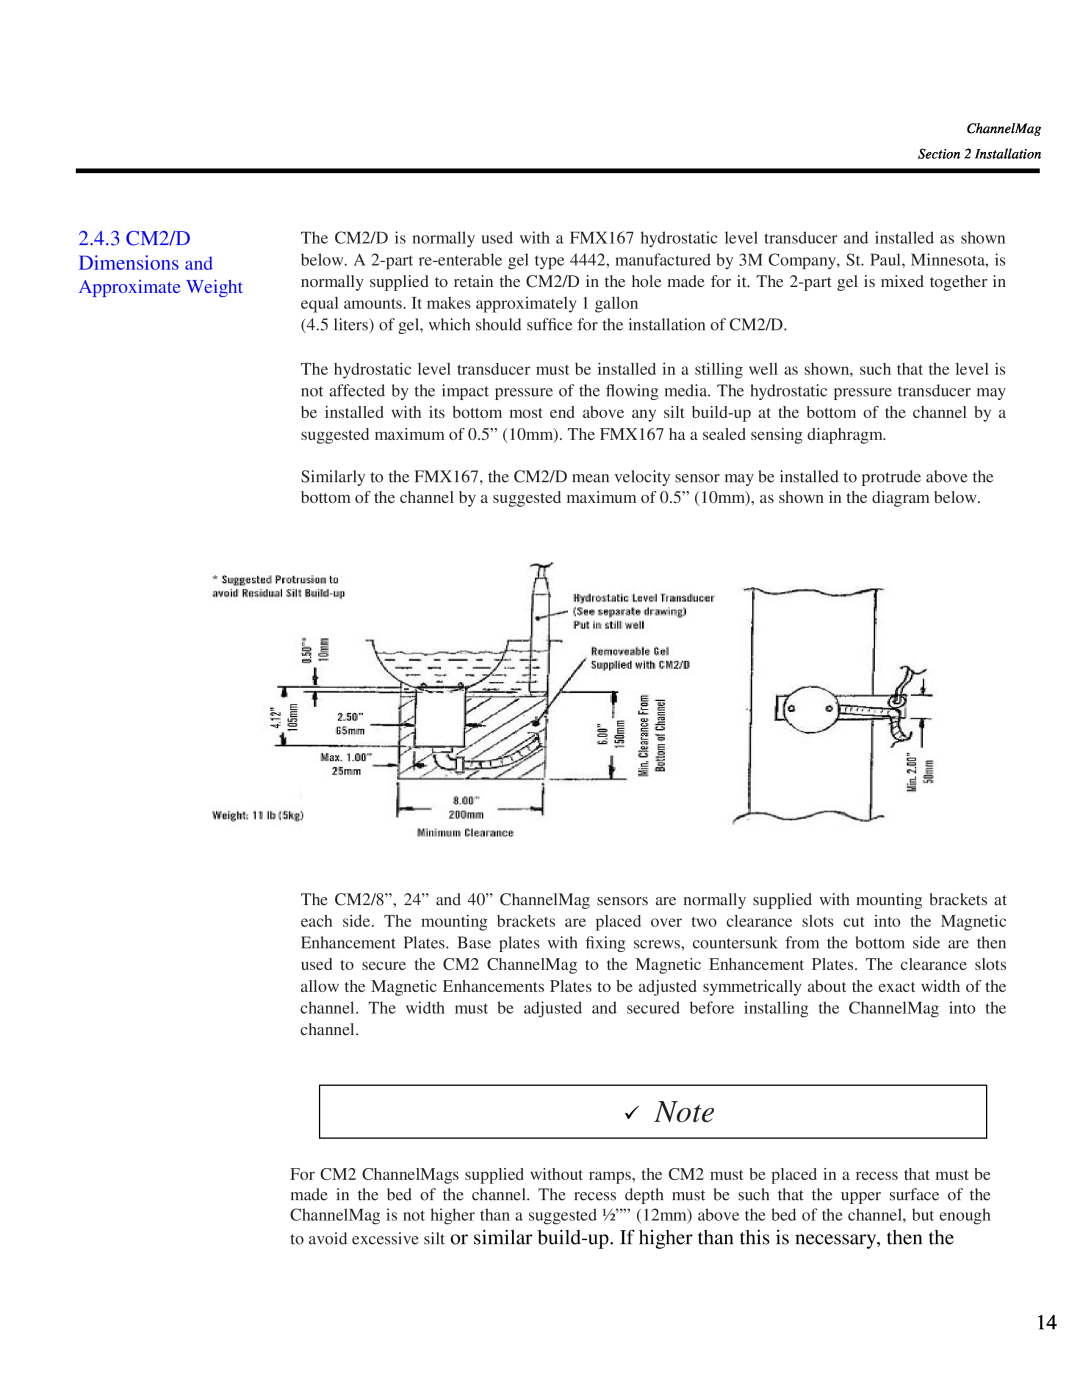 Arkon Channelmag instruction manual 2.4.3 CM2/D Dimensions and, Approximate Weight 